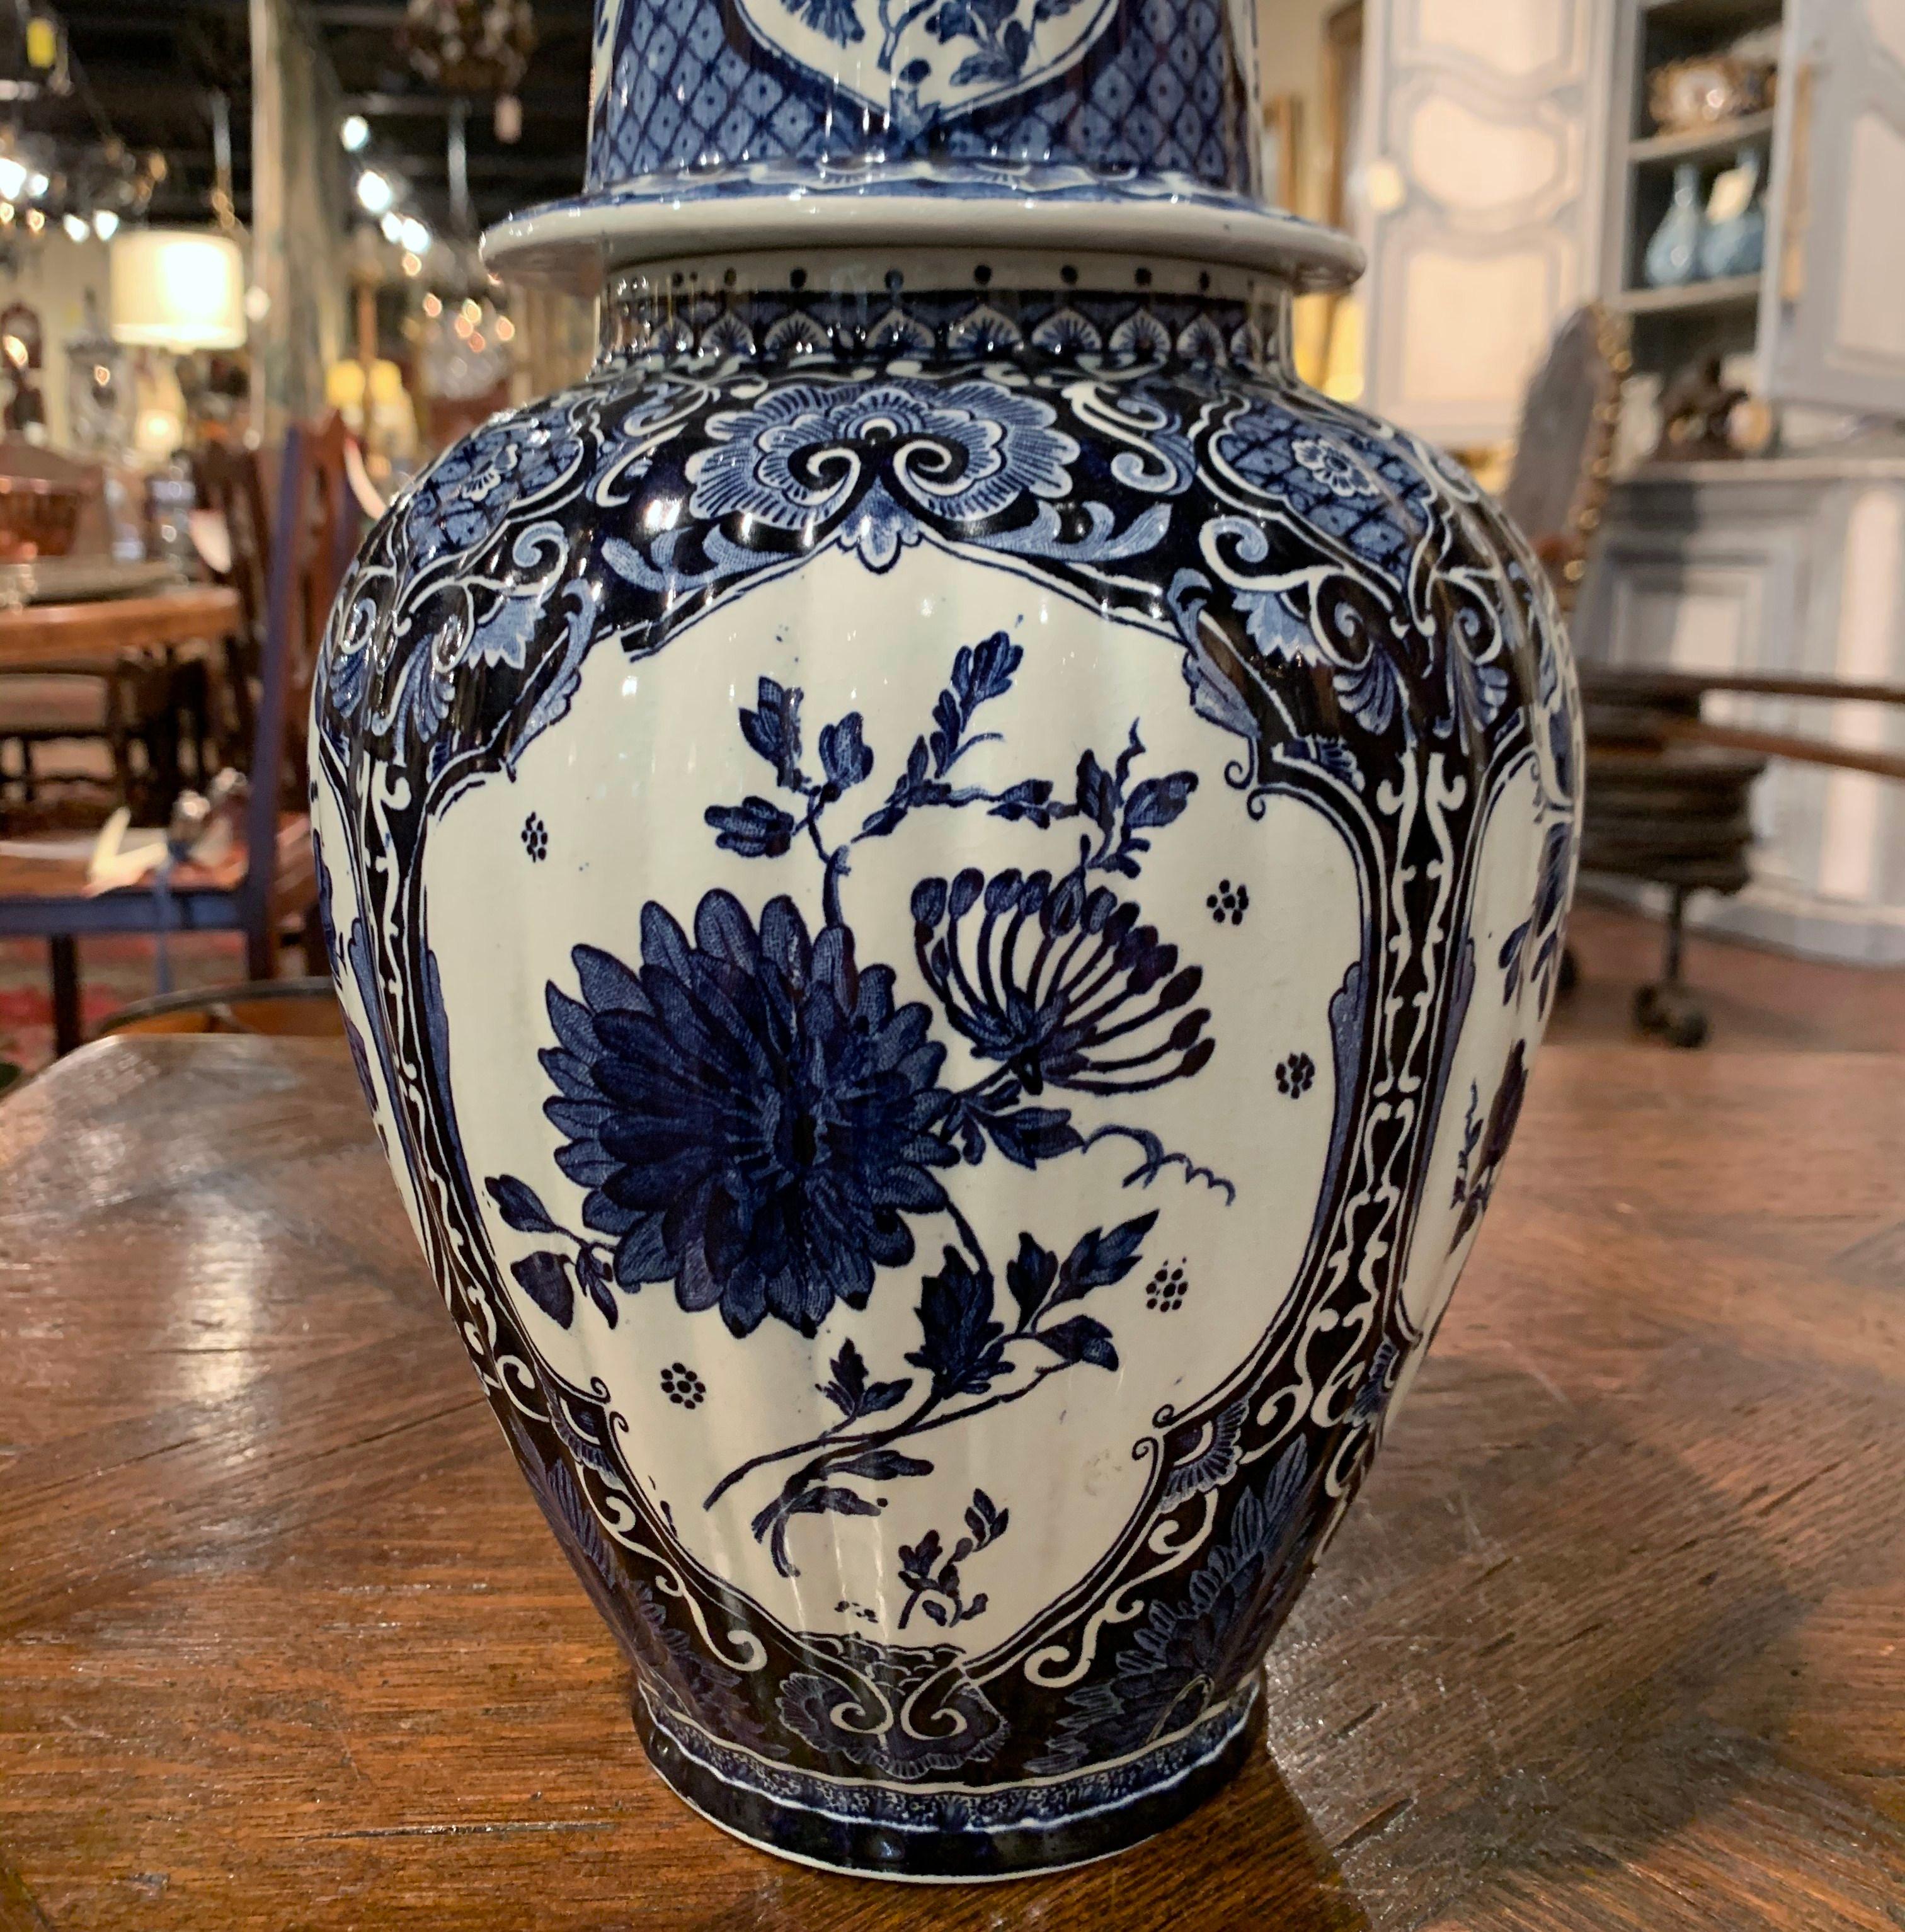 Ceramic Mid-20th Century Dutch Blue and White Floral Royal Delft Ginger Jar with Lid